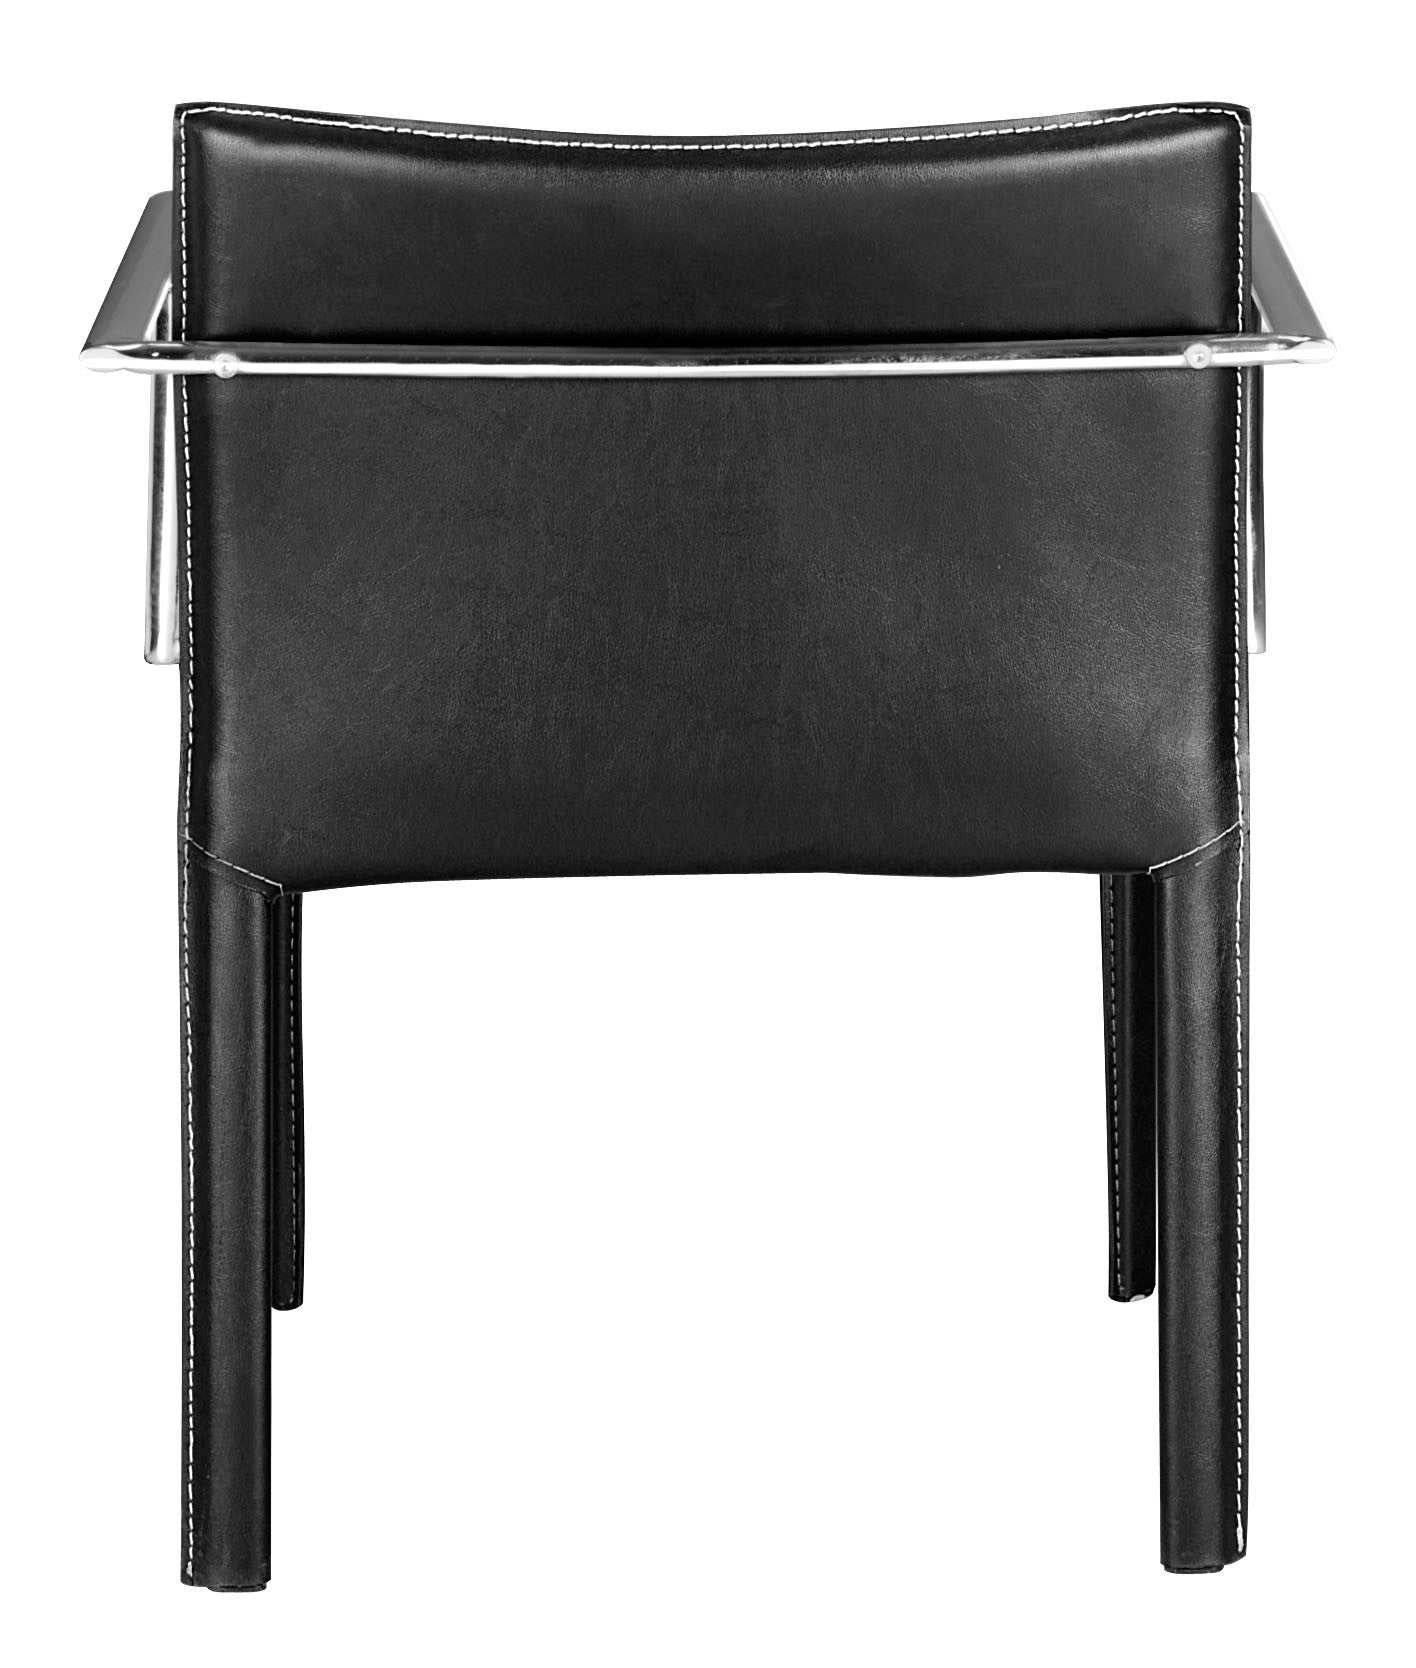 Gallant Conference Chair Black (Set of 2)